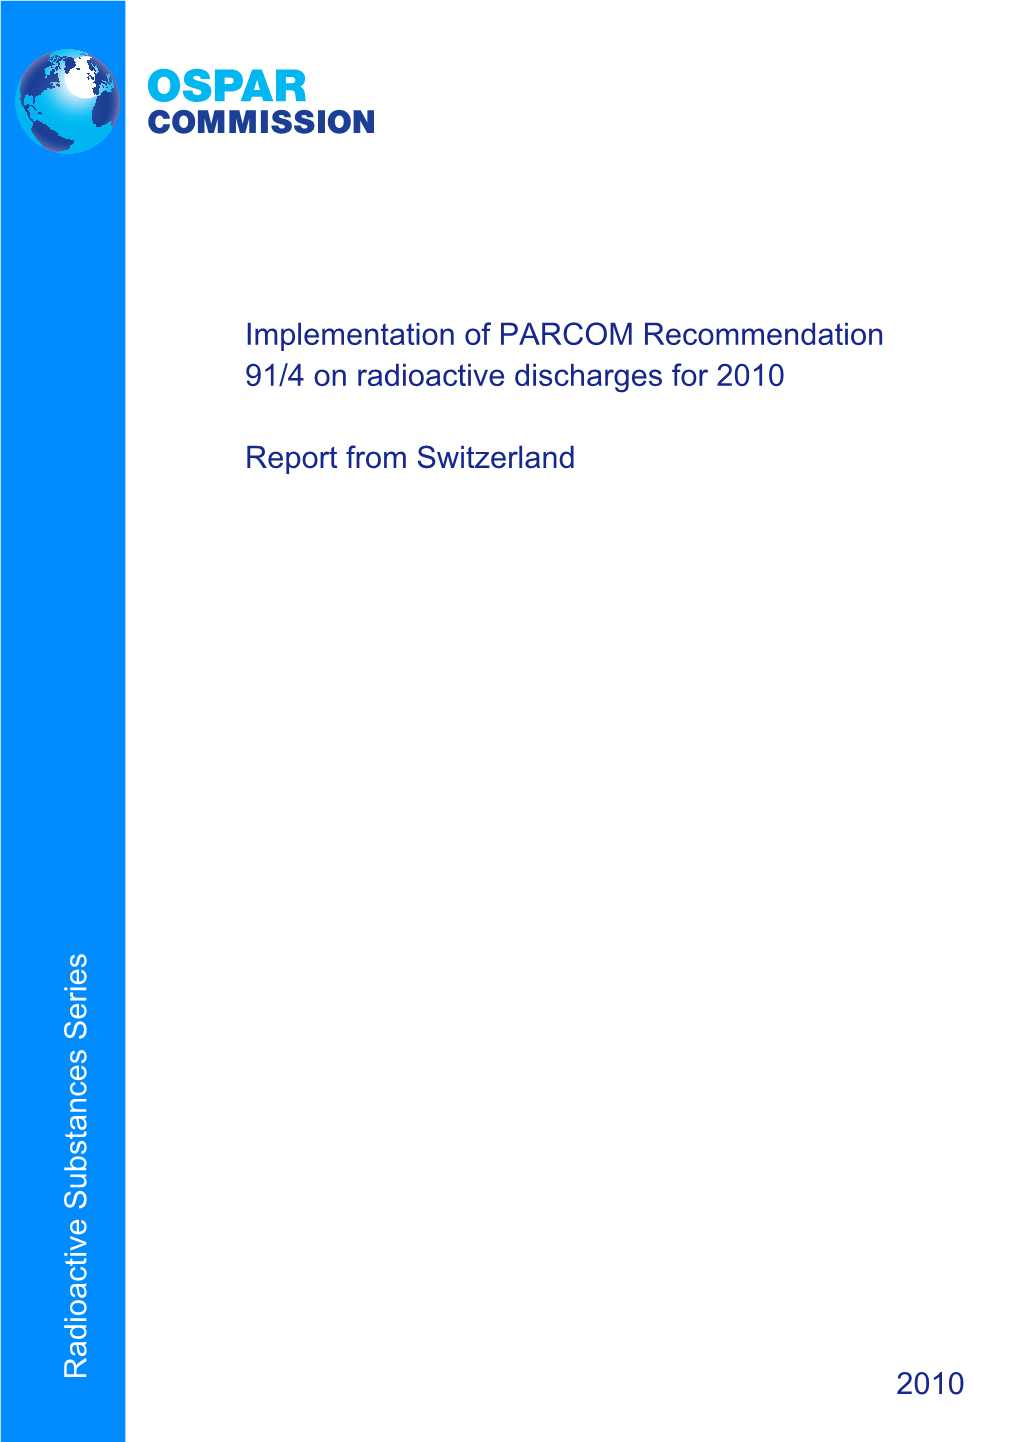 Implementation of PARCOM Recommendation 91/4 On